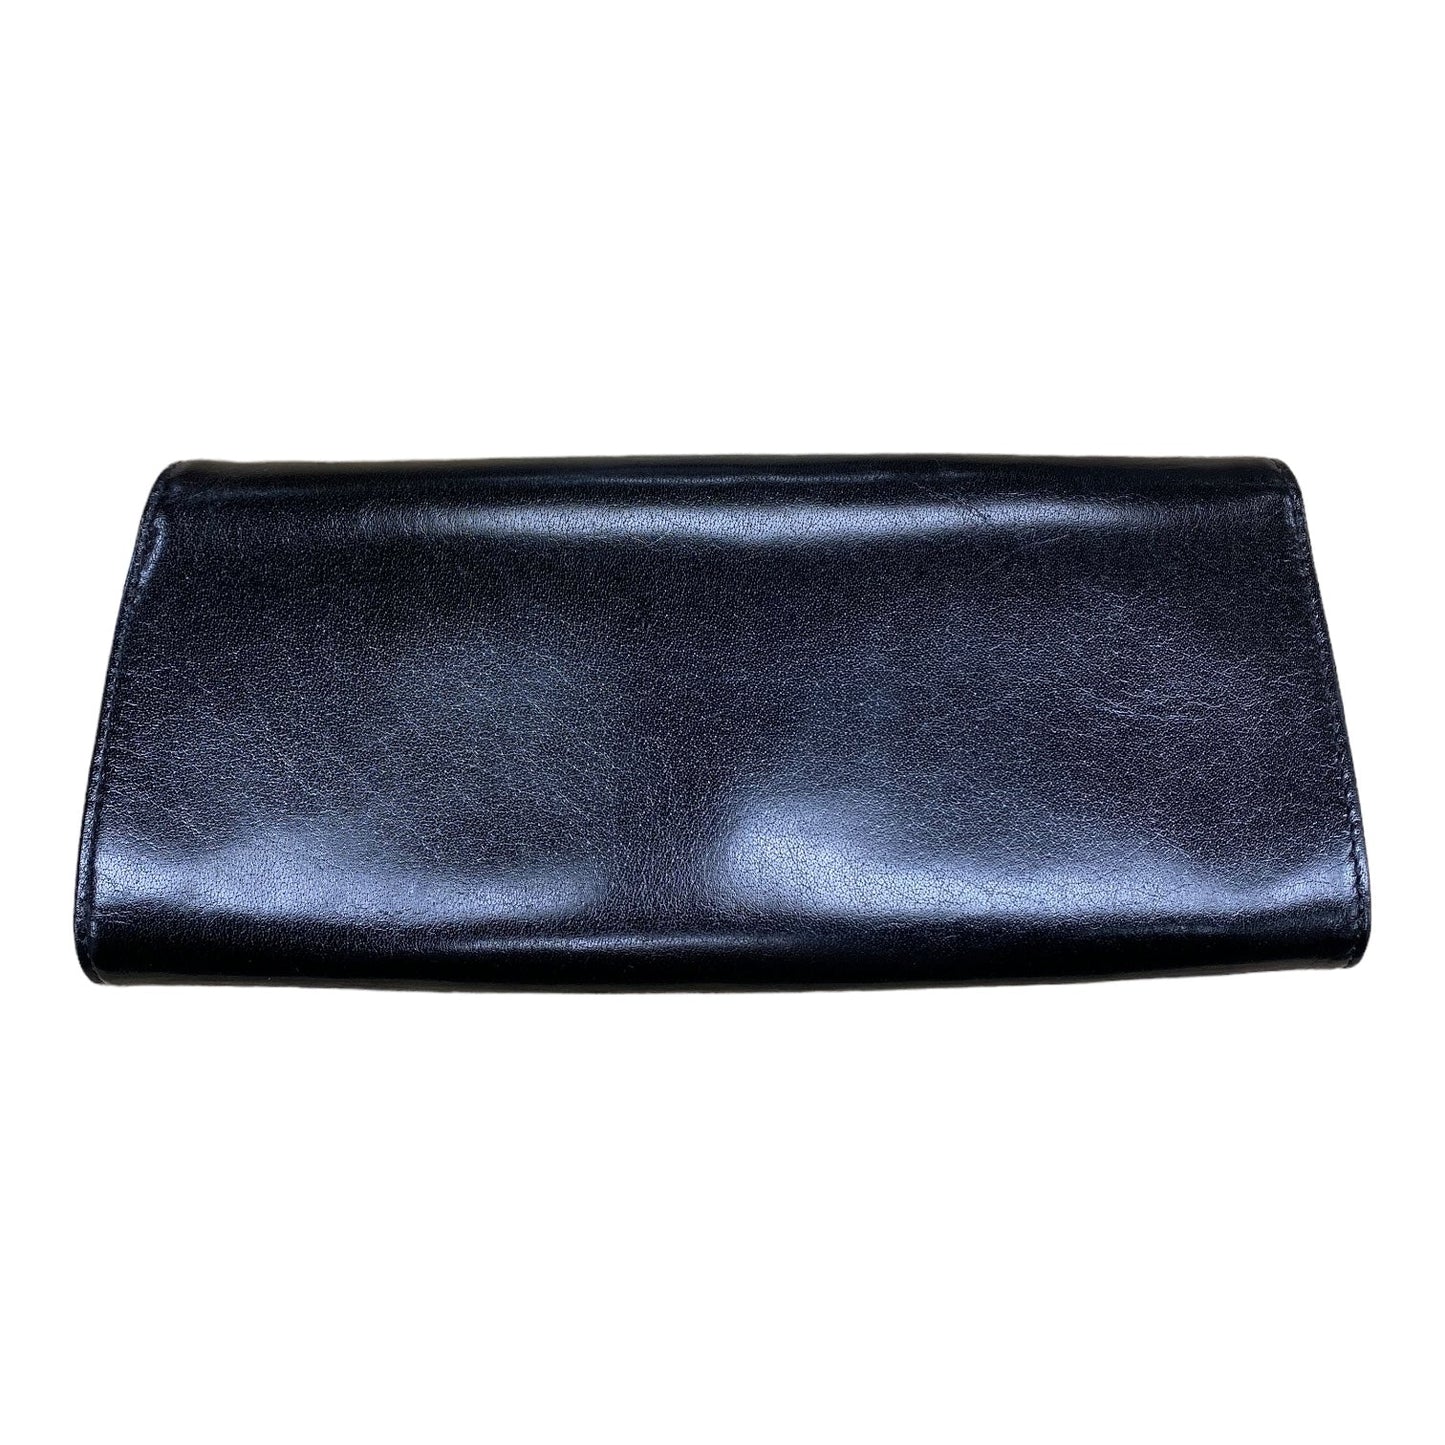 Clutch Leather By Hobo Intl  Size: Medium